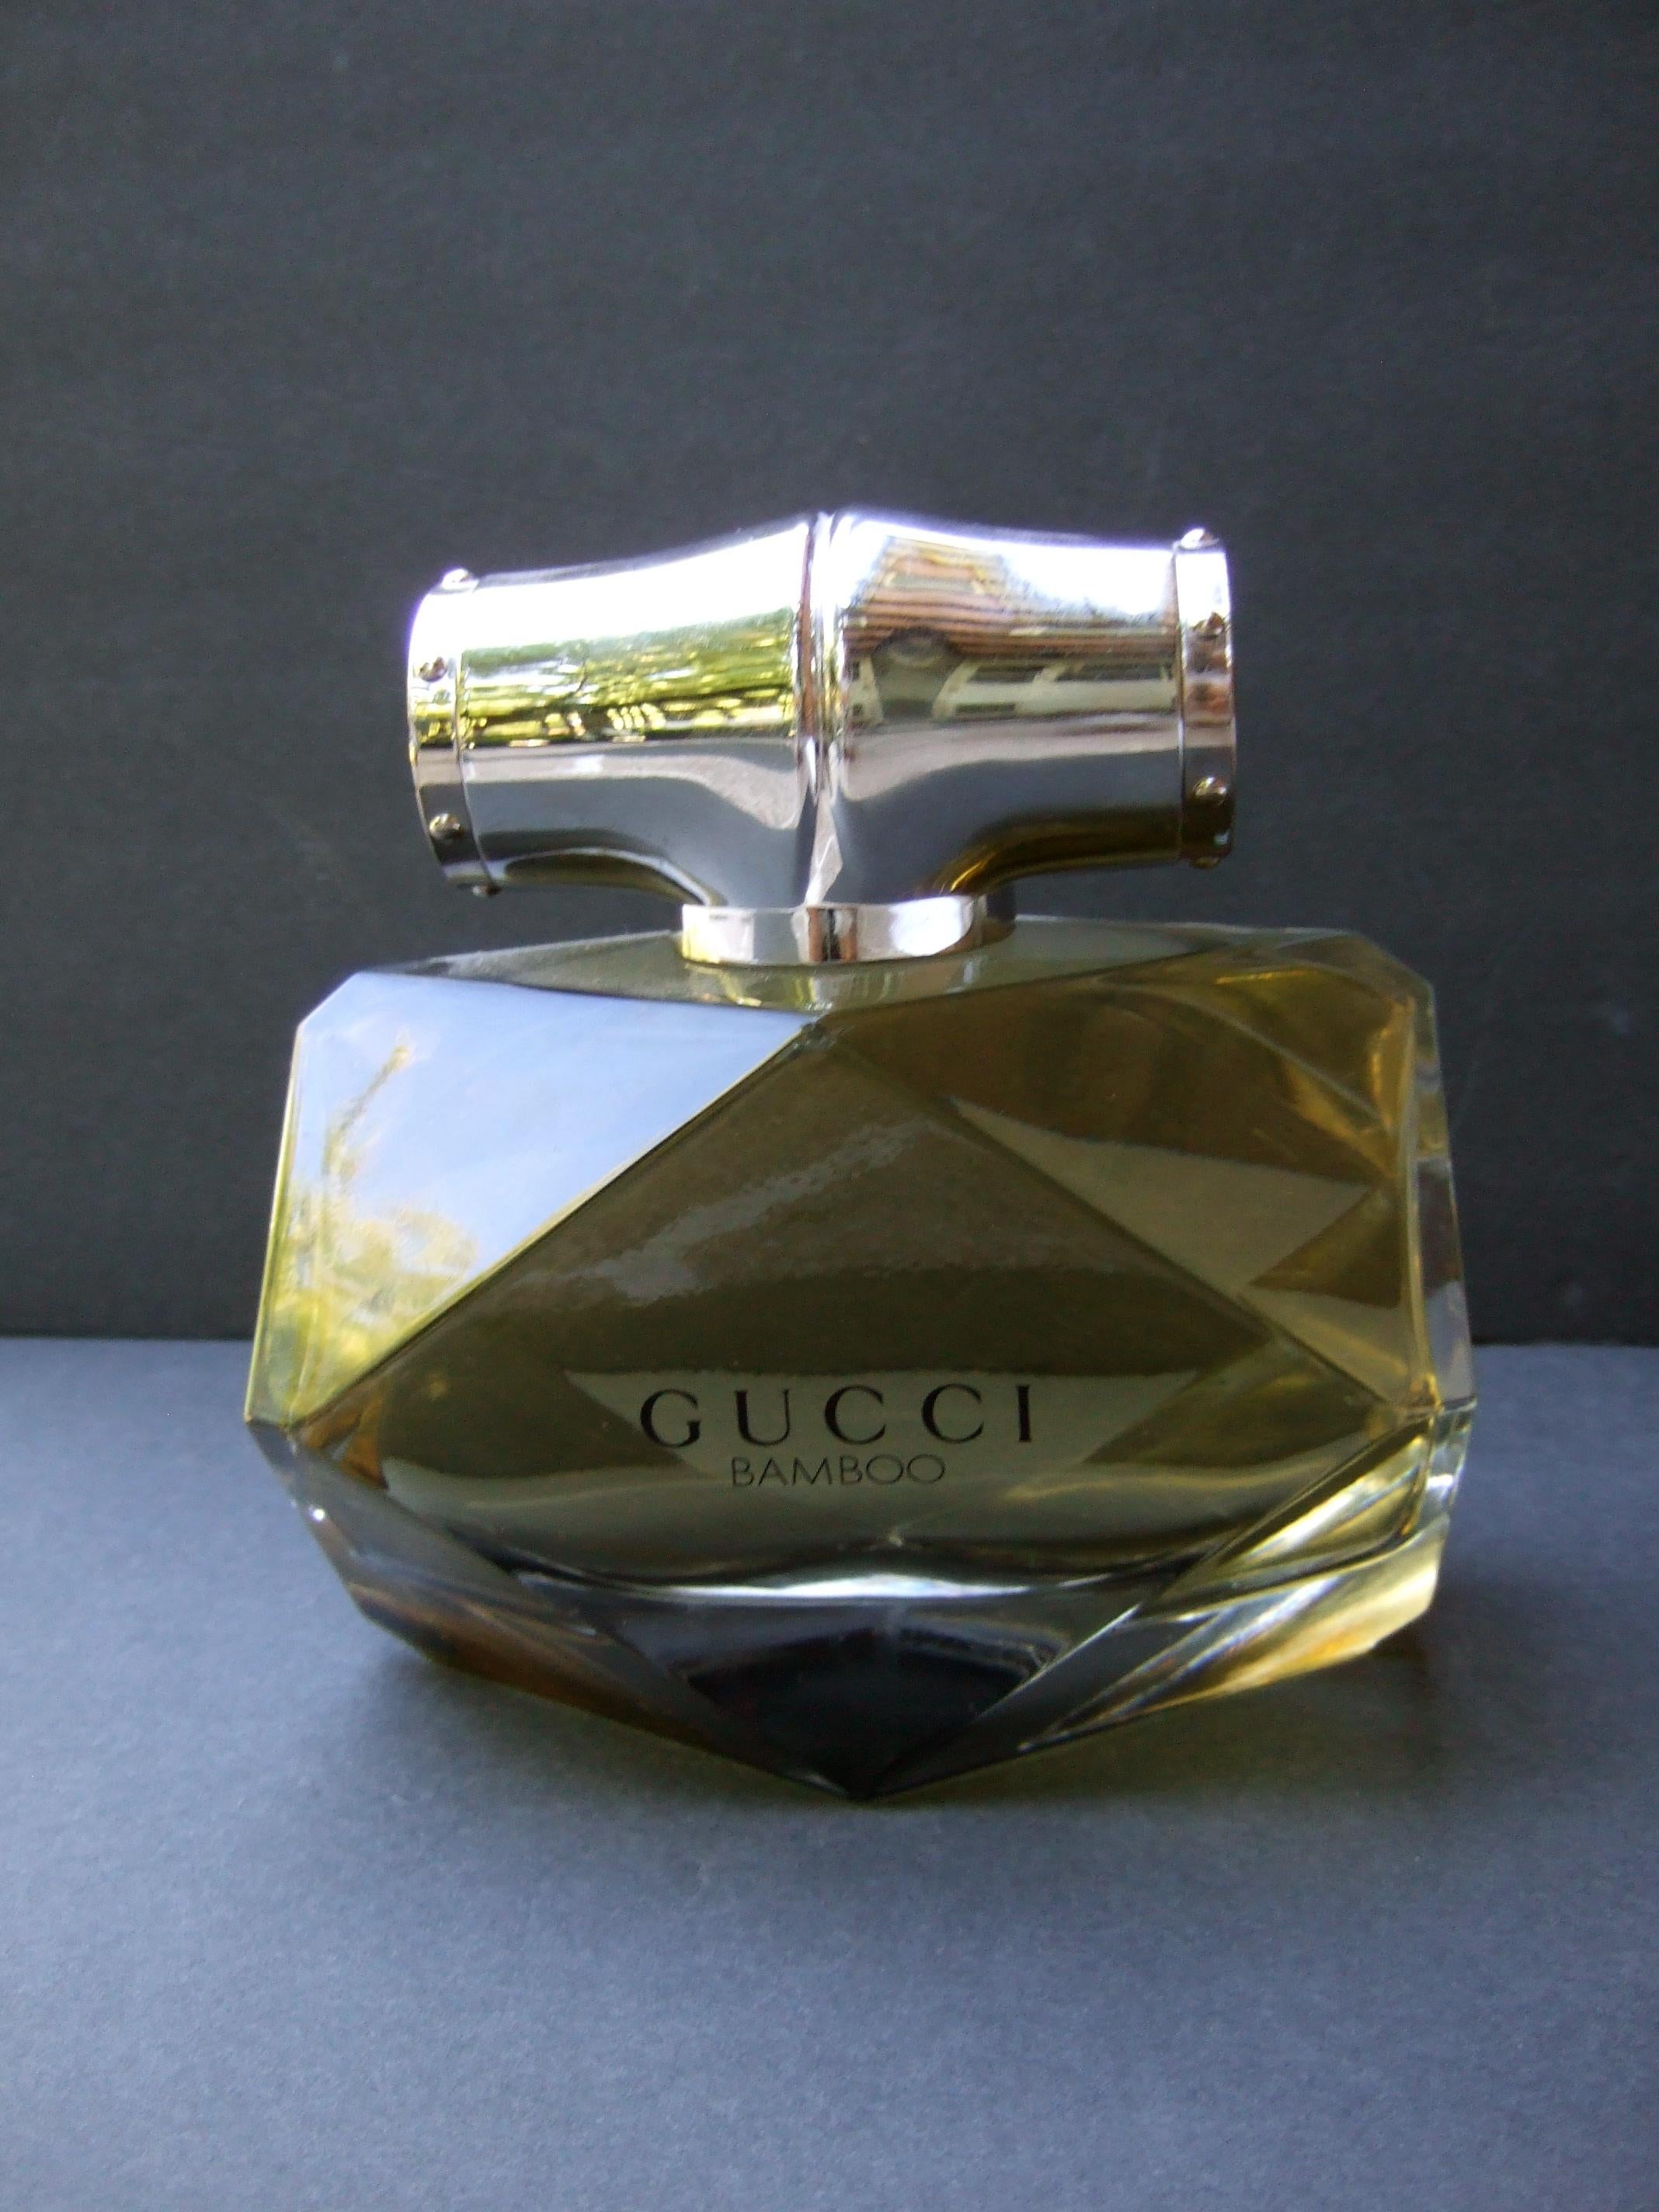 Gucci Bamboo Huge Glass Factice Faceted Display Dekorative Flasche c 21st c  im Angebot 2